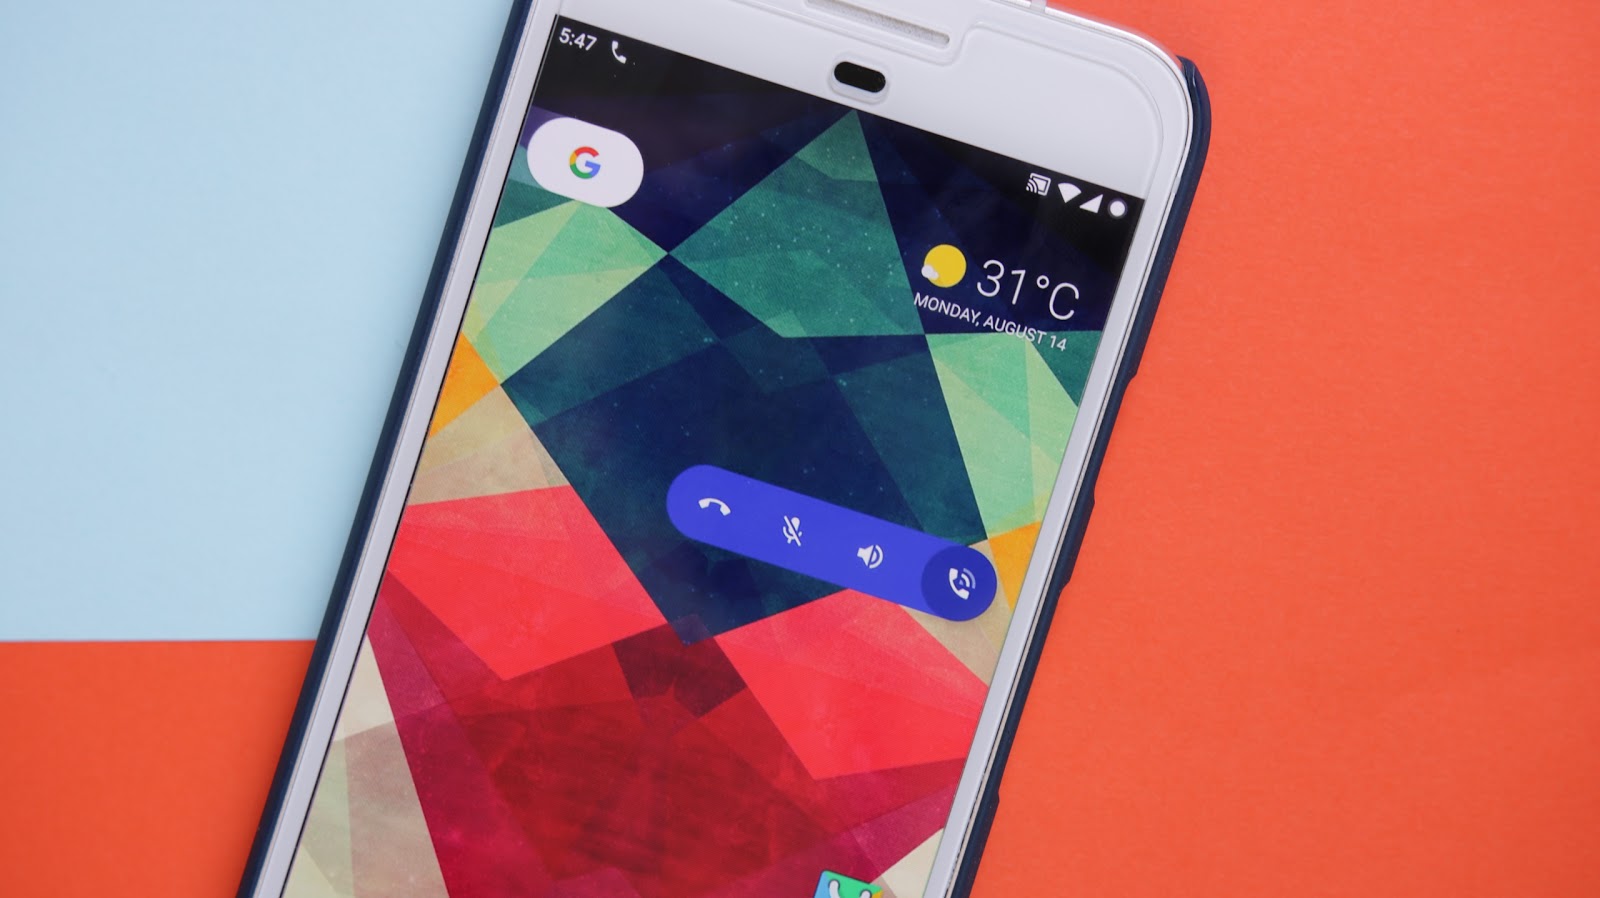 [Video] Google's Phone App Getting In-Call Home Screen Floating Bubble